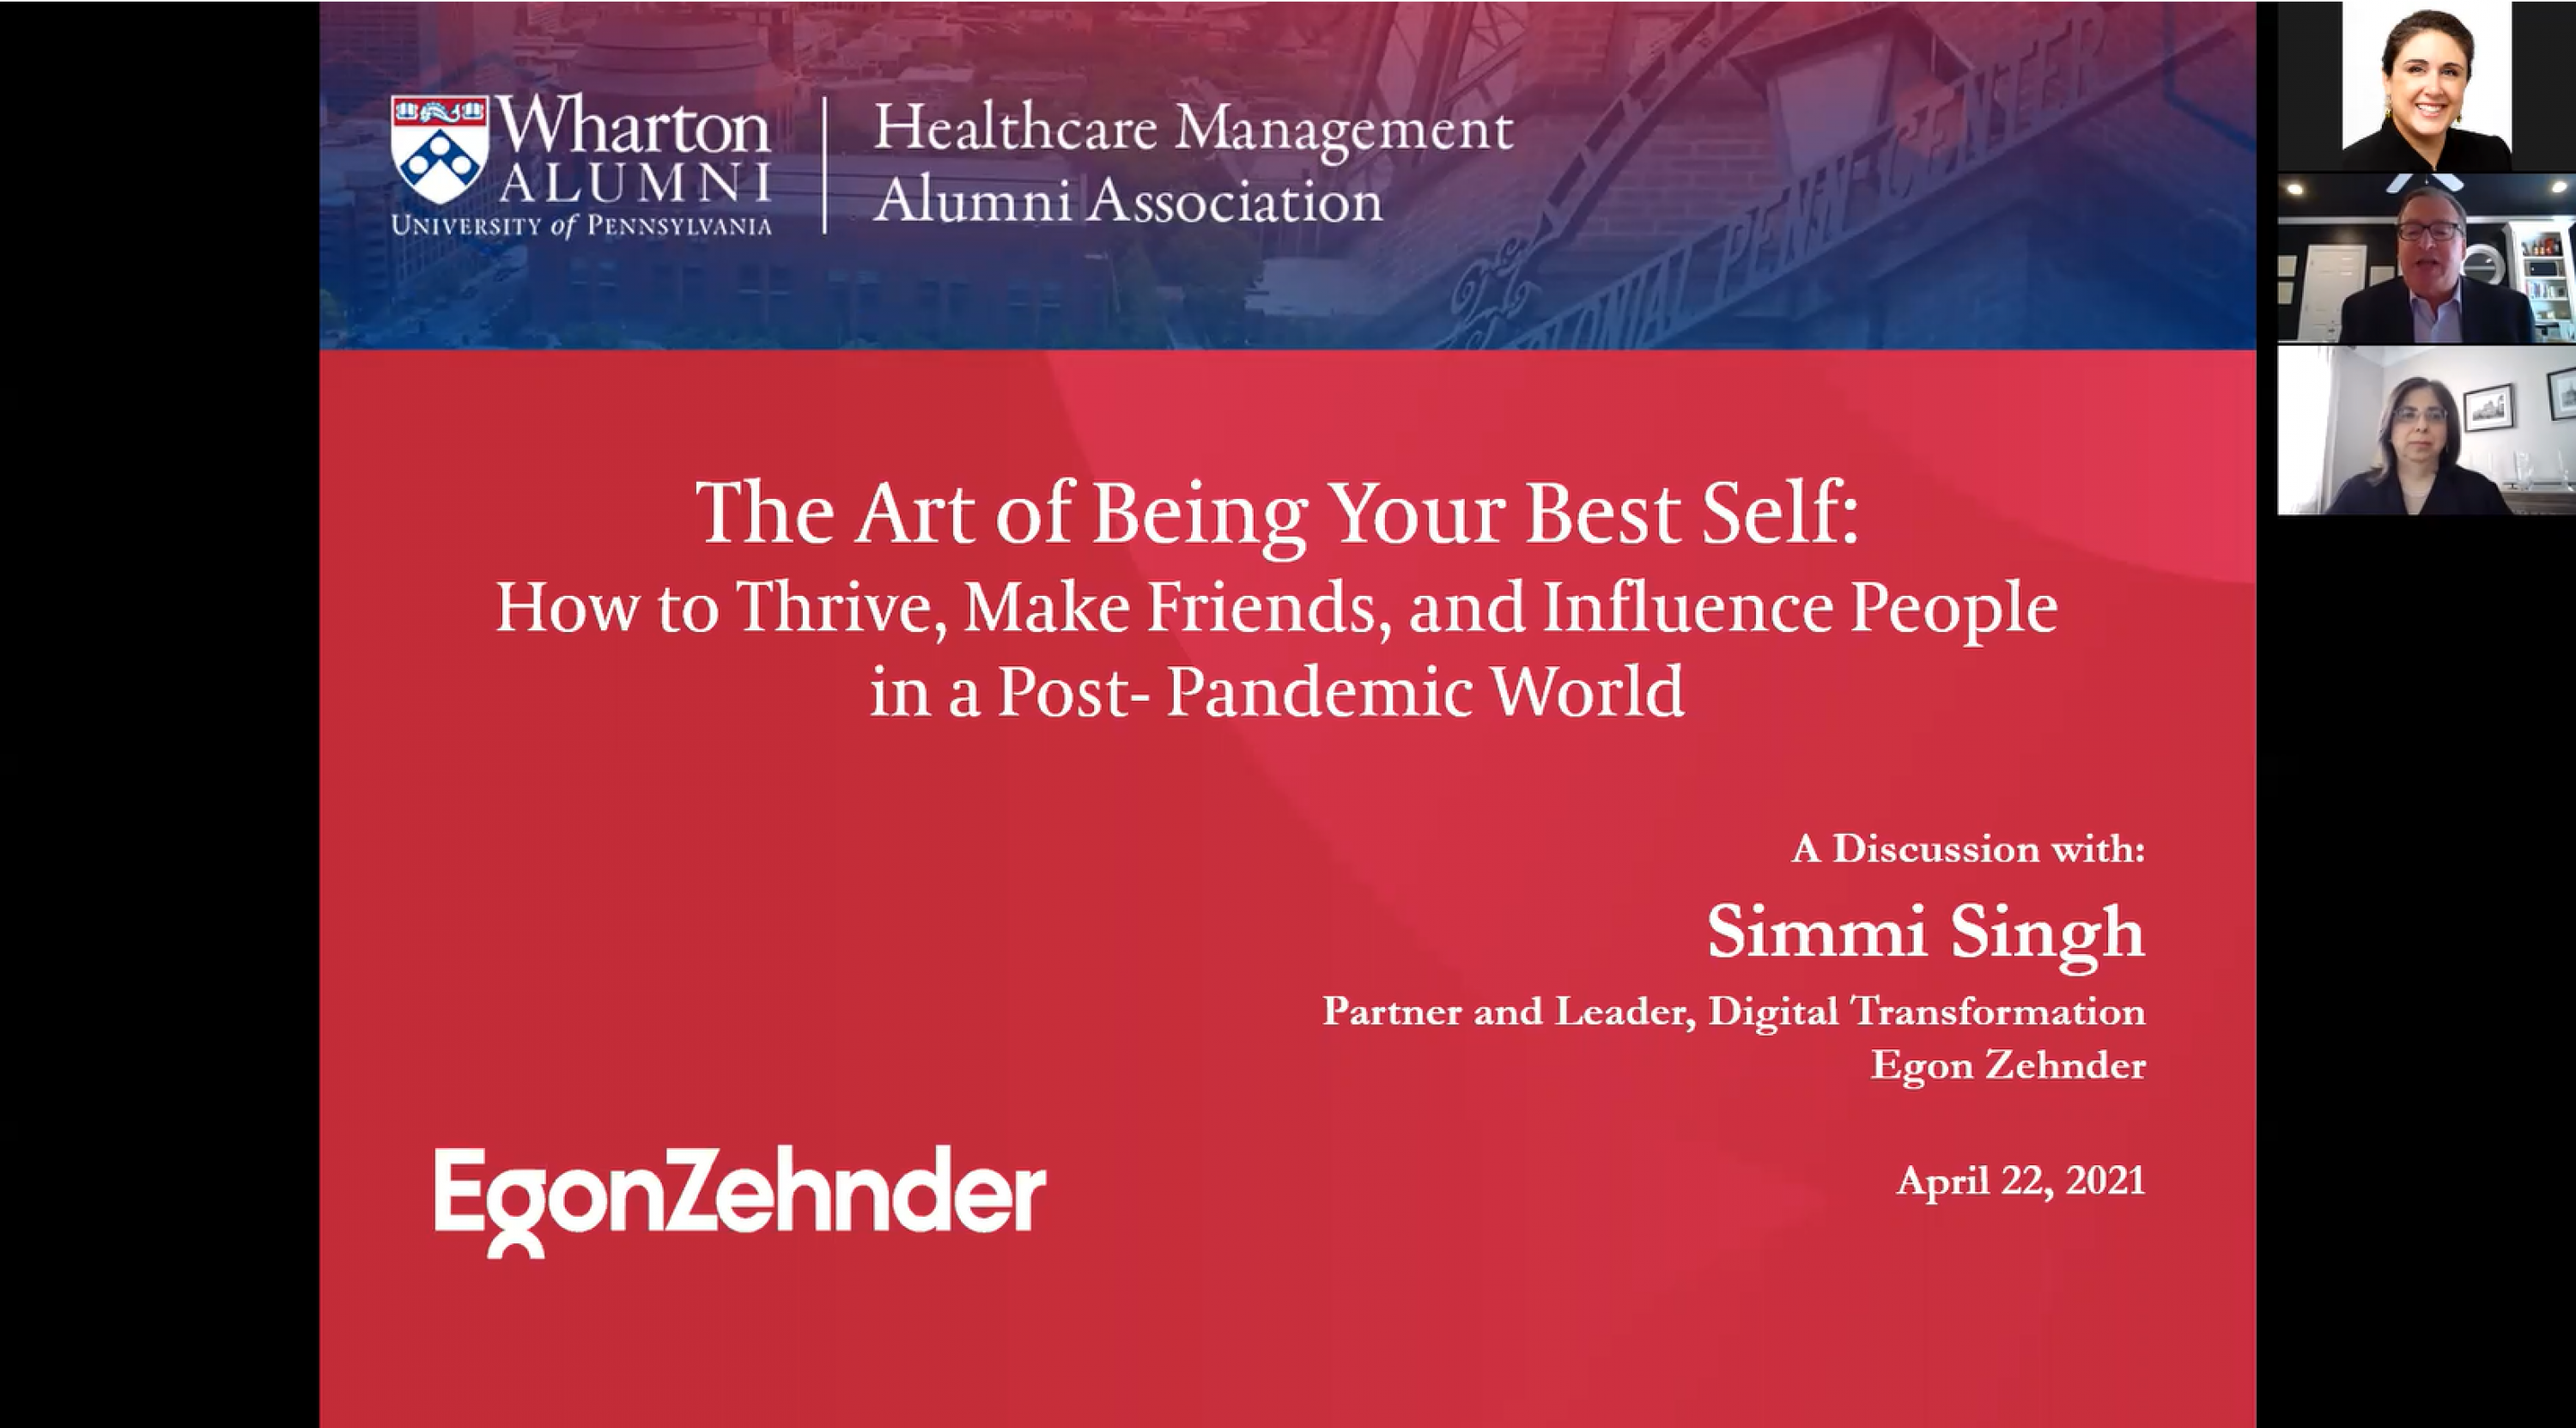 The Art of Being Your Best Self: How to Thrive, Make Friends, and Influence People in a Post-Pandemic World